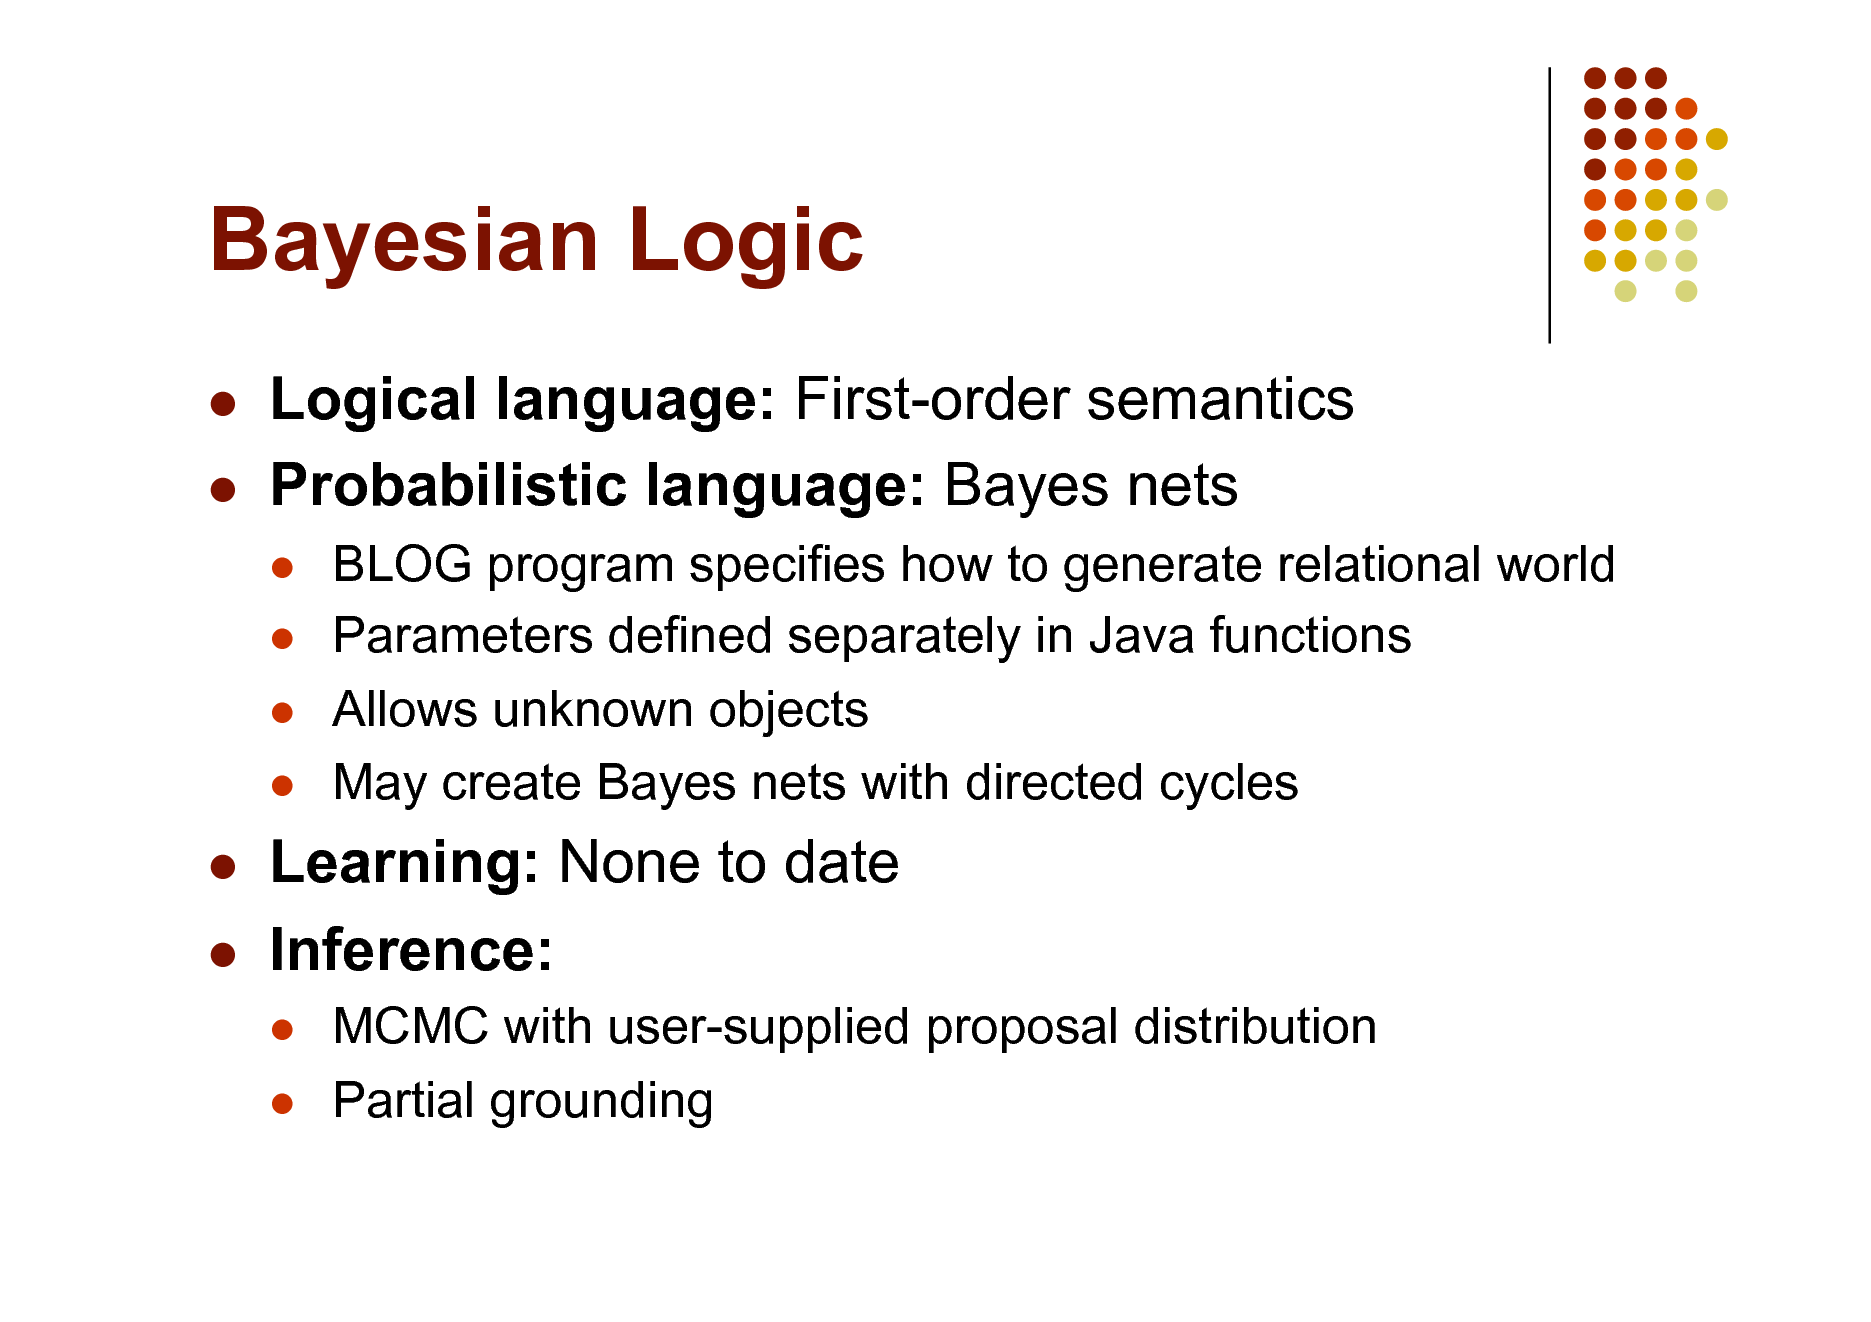 Slide: Bayesian Logic
 

Logical language: First-order semantics Probabilistic language: Bayes nets
   

BLOG program specifies how to generate relational world Parameters defined separately in Java functions Allows unknown objects May create Bayes nets with directed cycles

 

Learning: None to date Inference:
 

MCMC with user-supplied proposal distribution Partial grounding

